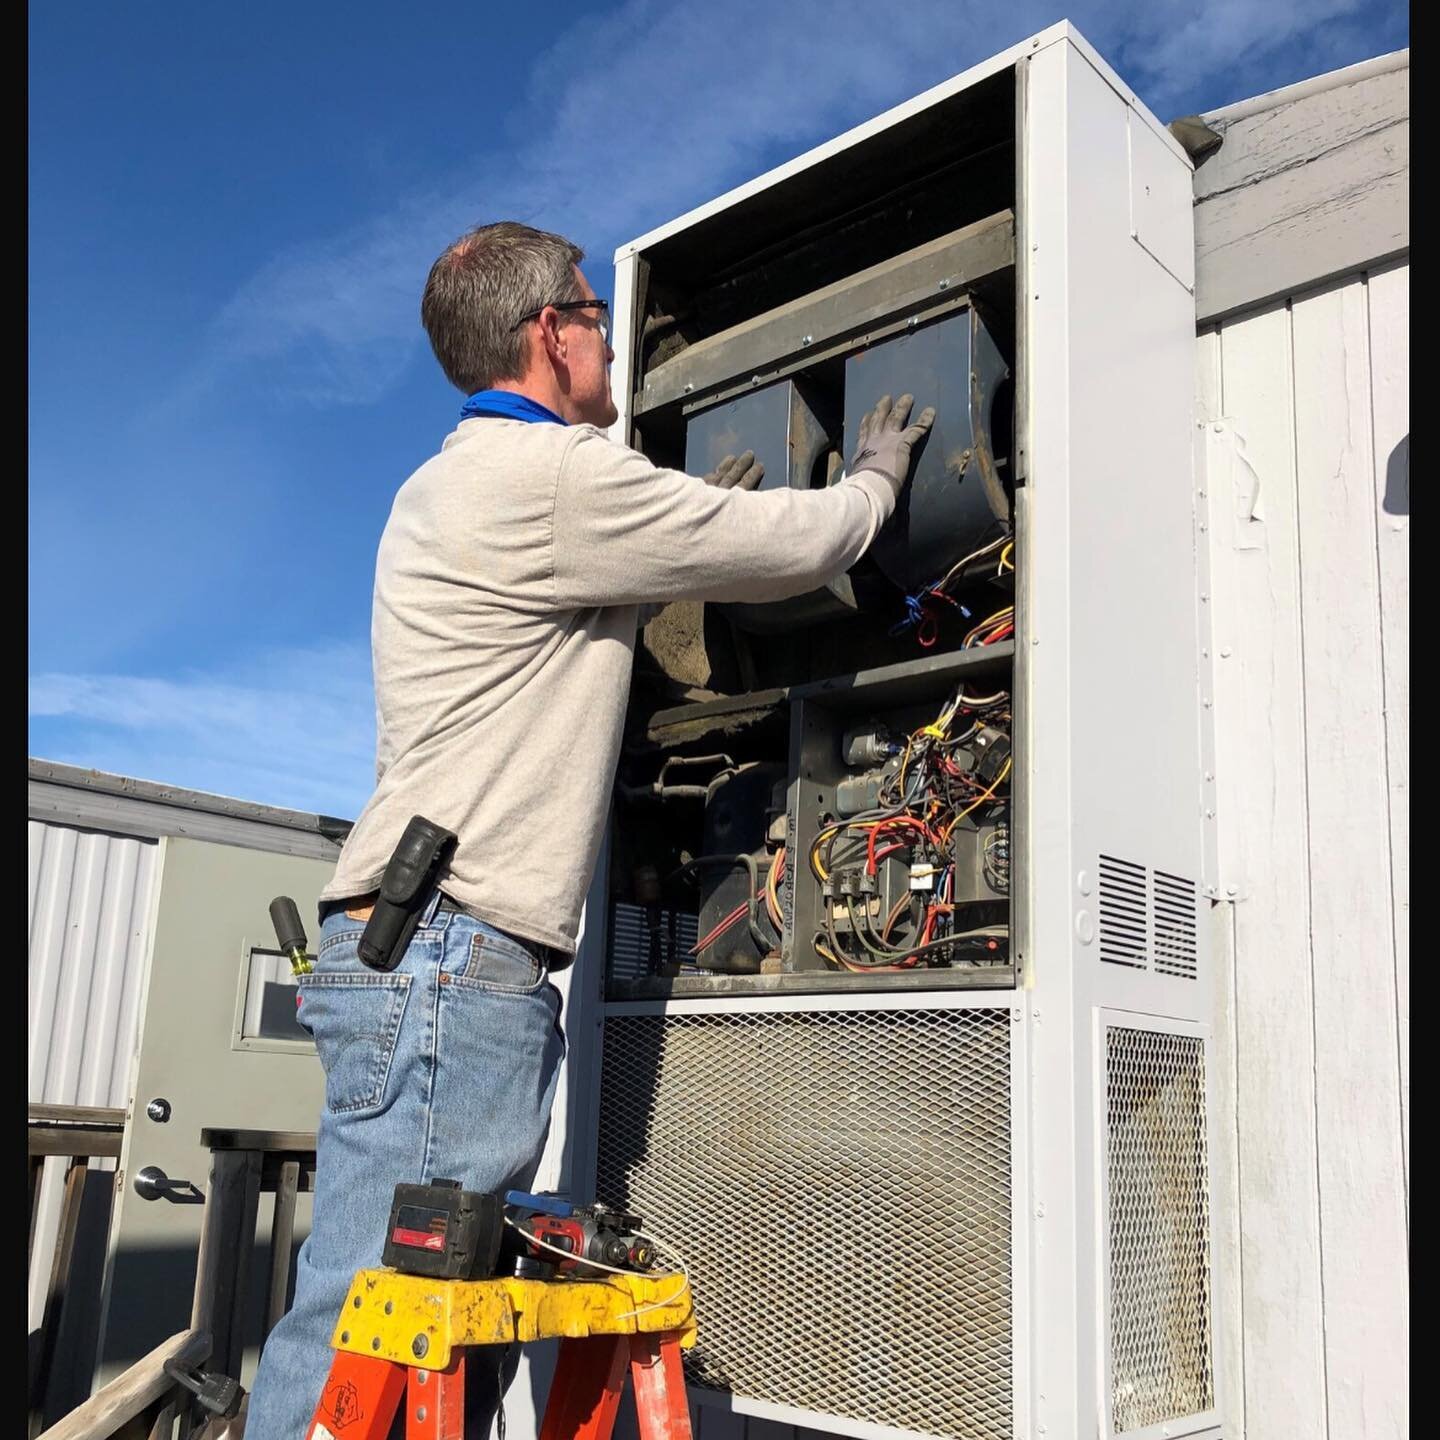 Don't wait for a breakdown to take action. Now is the time to schedule preventative service for your cooling equipment in preparation for the summer heat. Call 833-728-8866 to set up a free site visit with our HVAC Service team.
#HVACmaintenance #bui